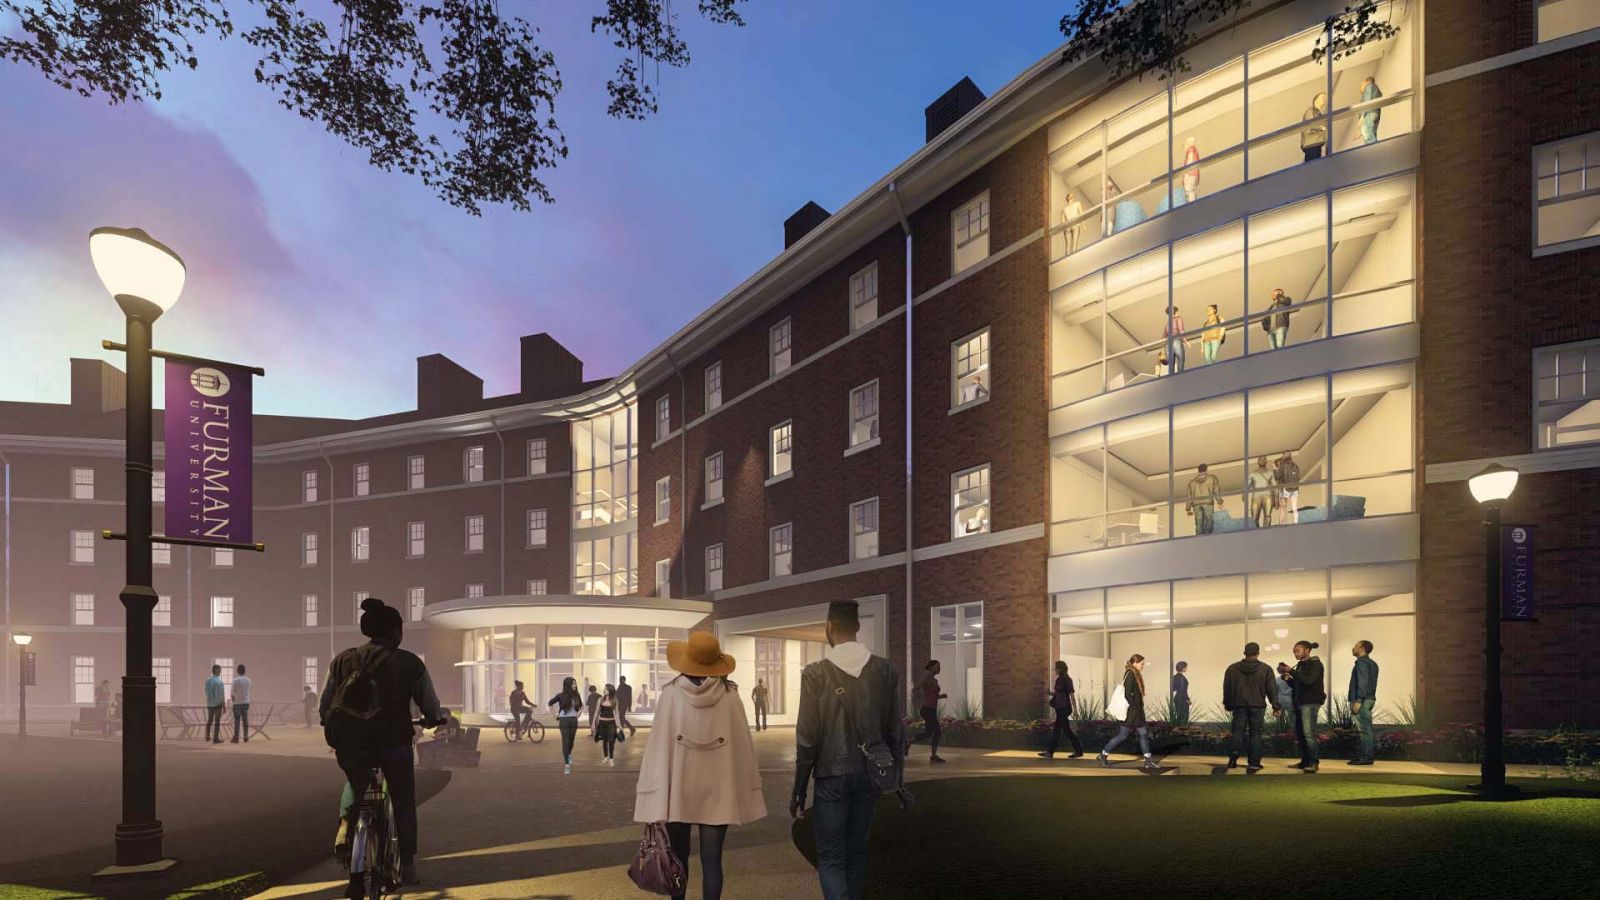 The new residence hall for first-year students will replace the current Blackwell Hall, built in 1967. (Rendering/Provided)